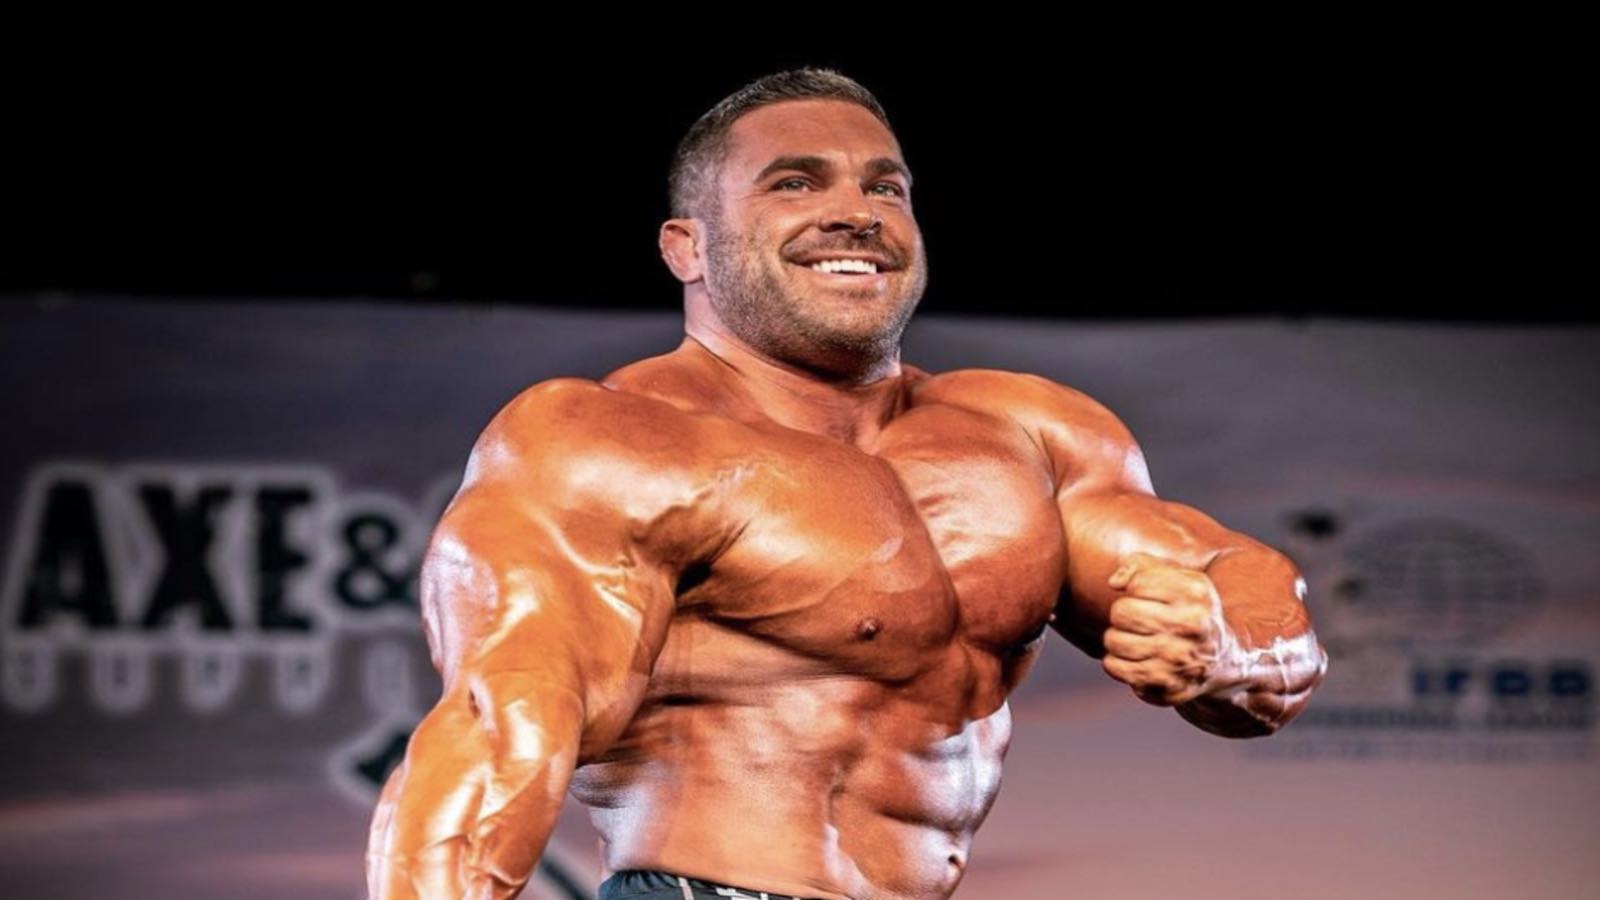 derek-lunsford-and-other-olympia-contenders-display-their-off-season-mass-guest-posing-at-2023-pittsburgh-pro-–-breaking-muscle